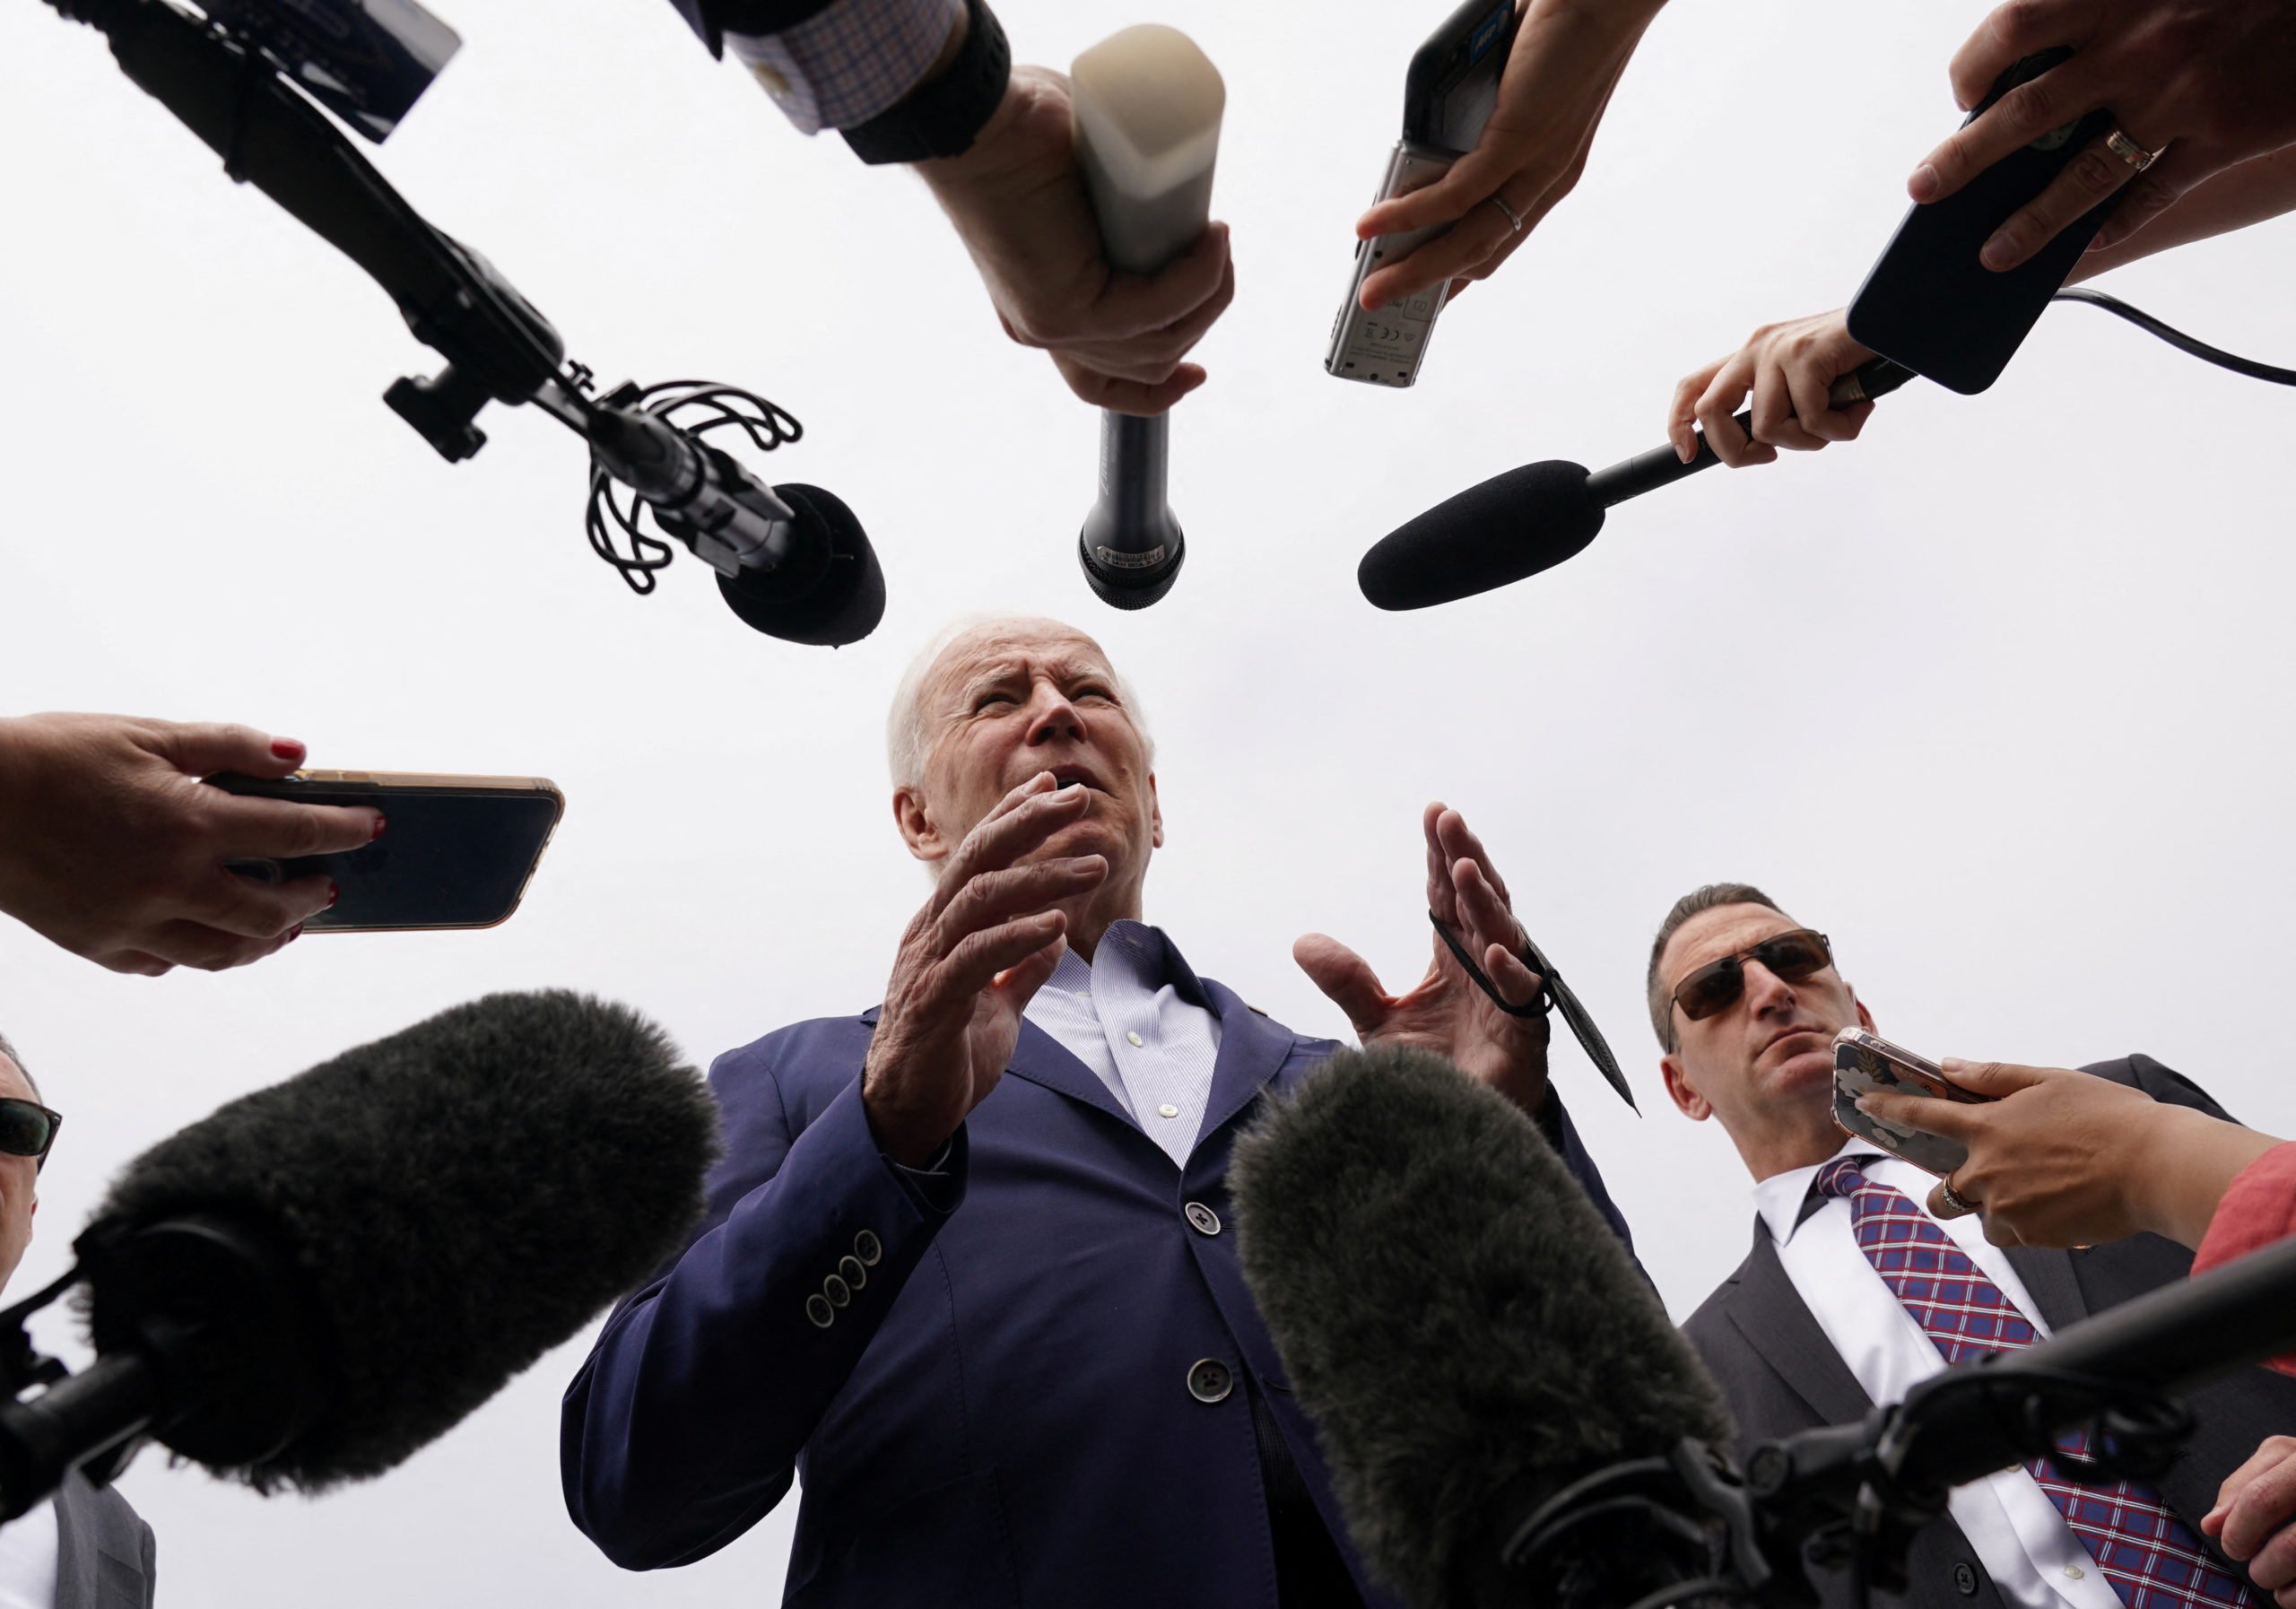 U.S. President Joe Biden speaks to reporters before boarding Air Force One upon departure after attending the Summit of the Americas in Los Angeles, California, U.S., June 11, 2022. REUTERS/Kevin Lamarque